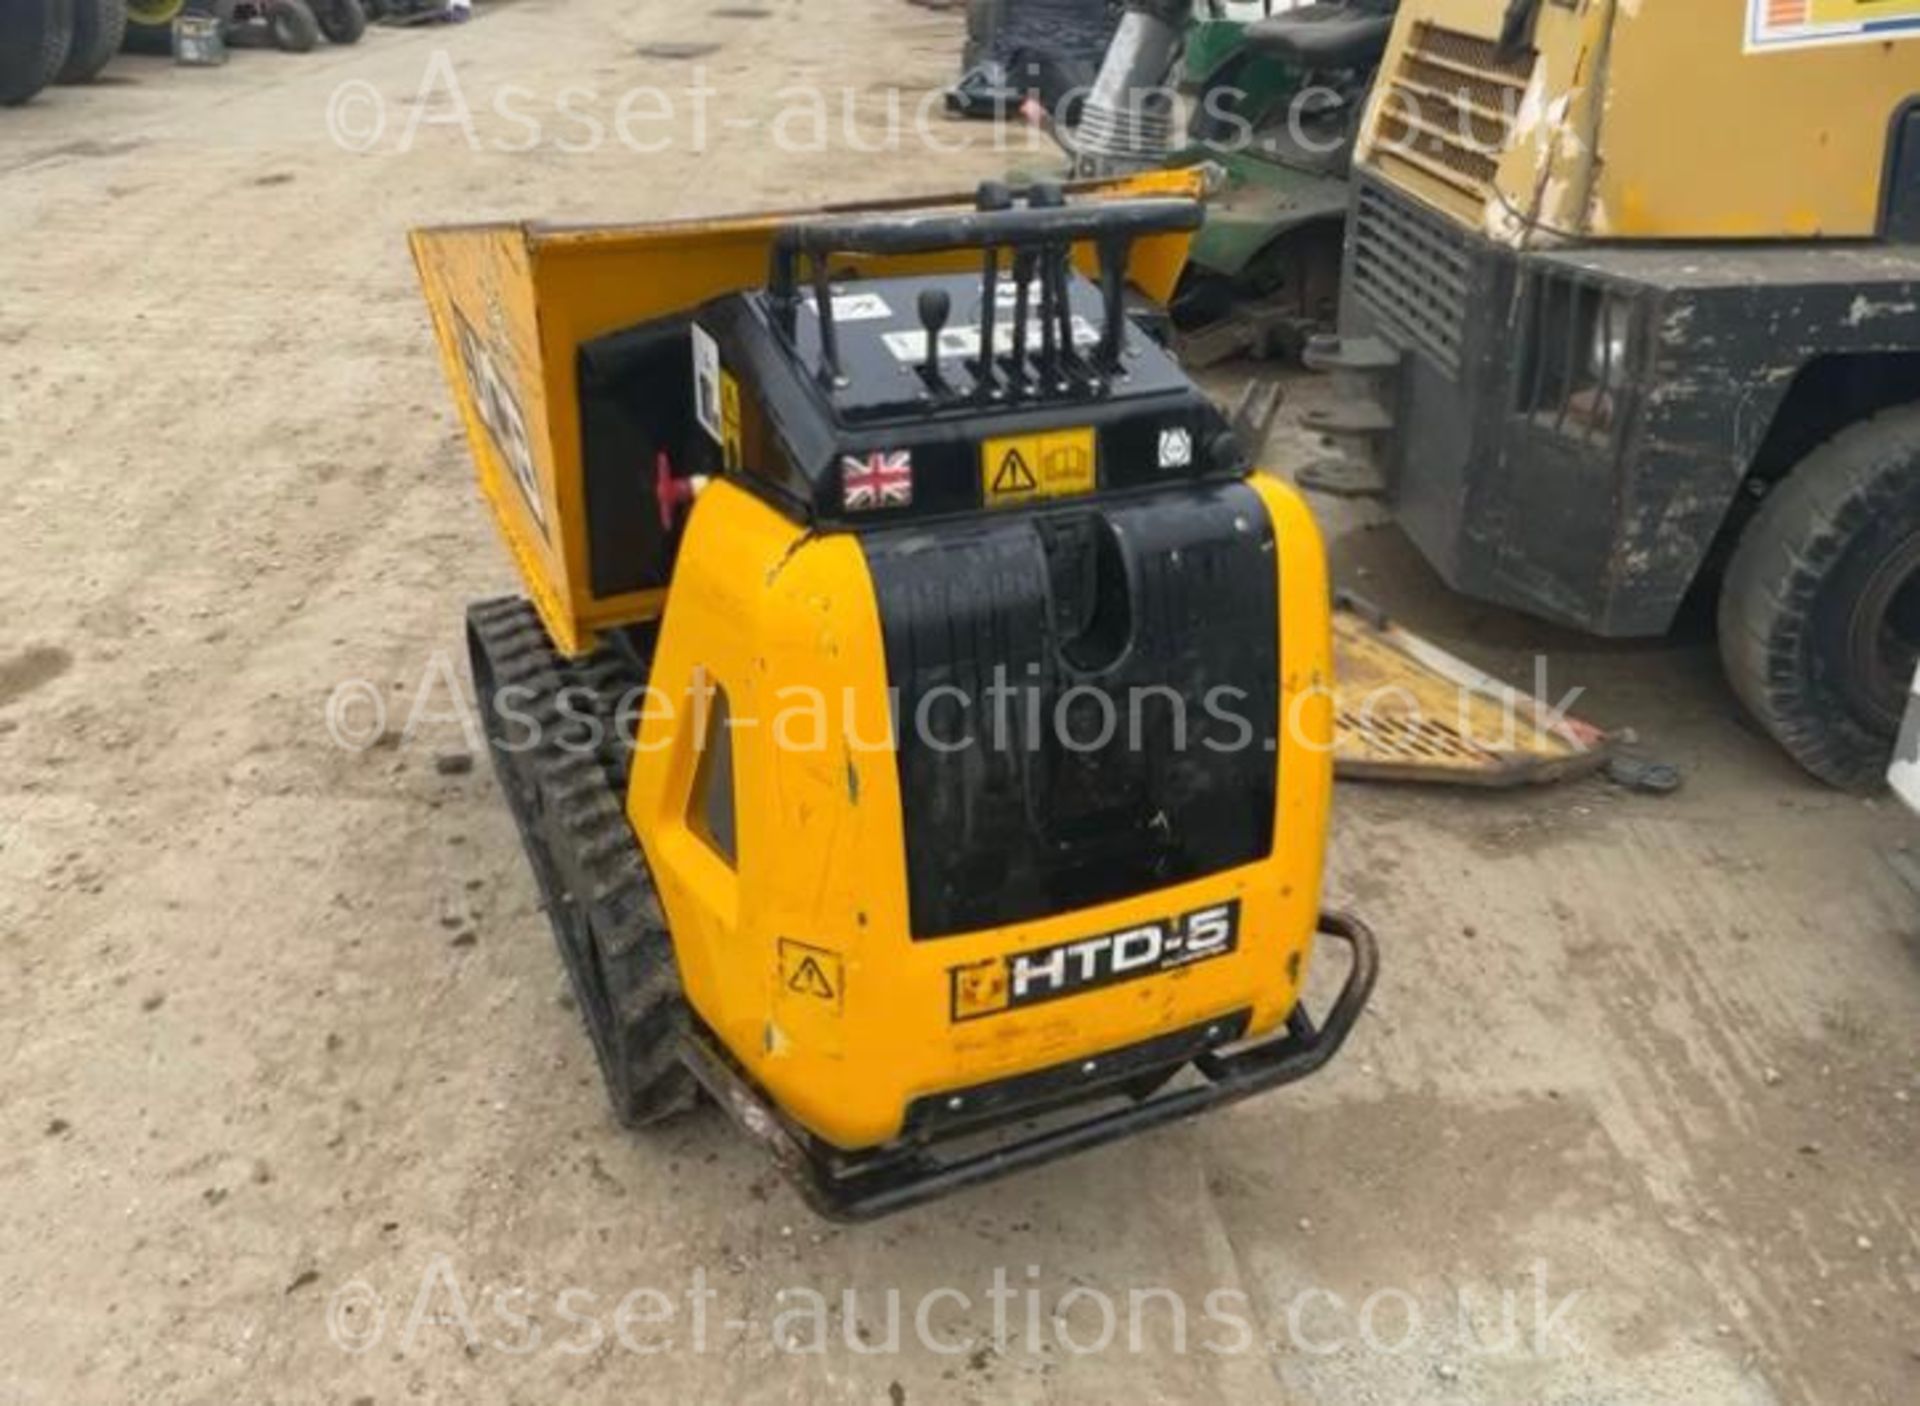 2019 JCB HTD-5 DIESEL TRACKED DUMPER, RUNS DRIVES AND WORKS WELL, ELECTRIC OR PULL START *PLUS VAT* - Image 7 of 20